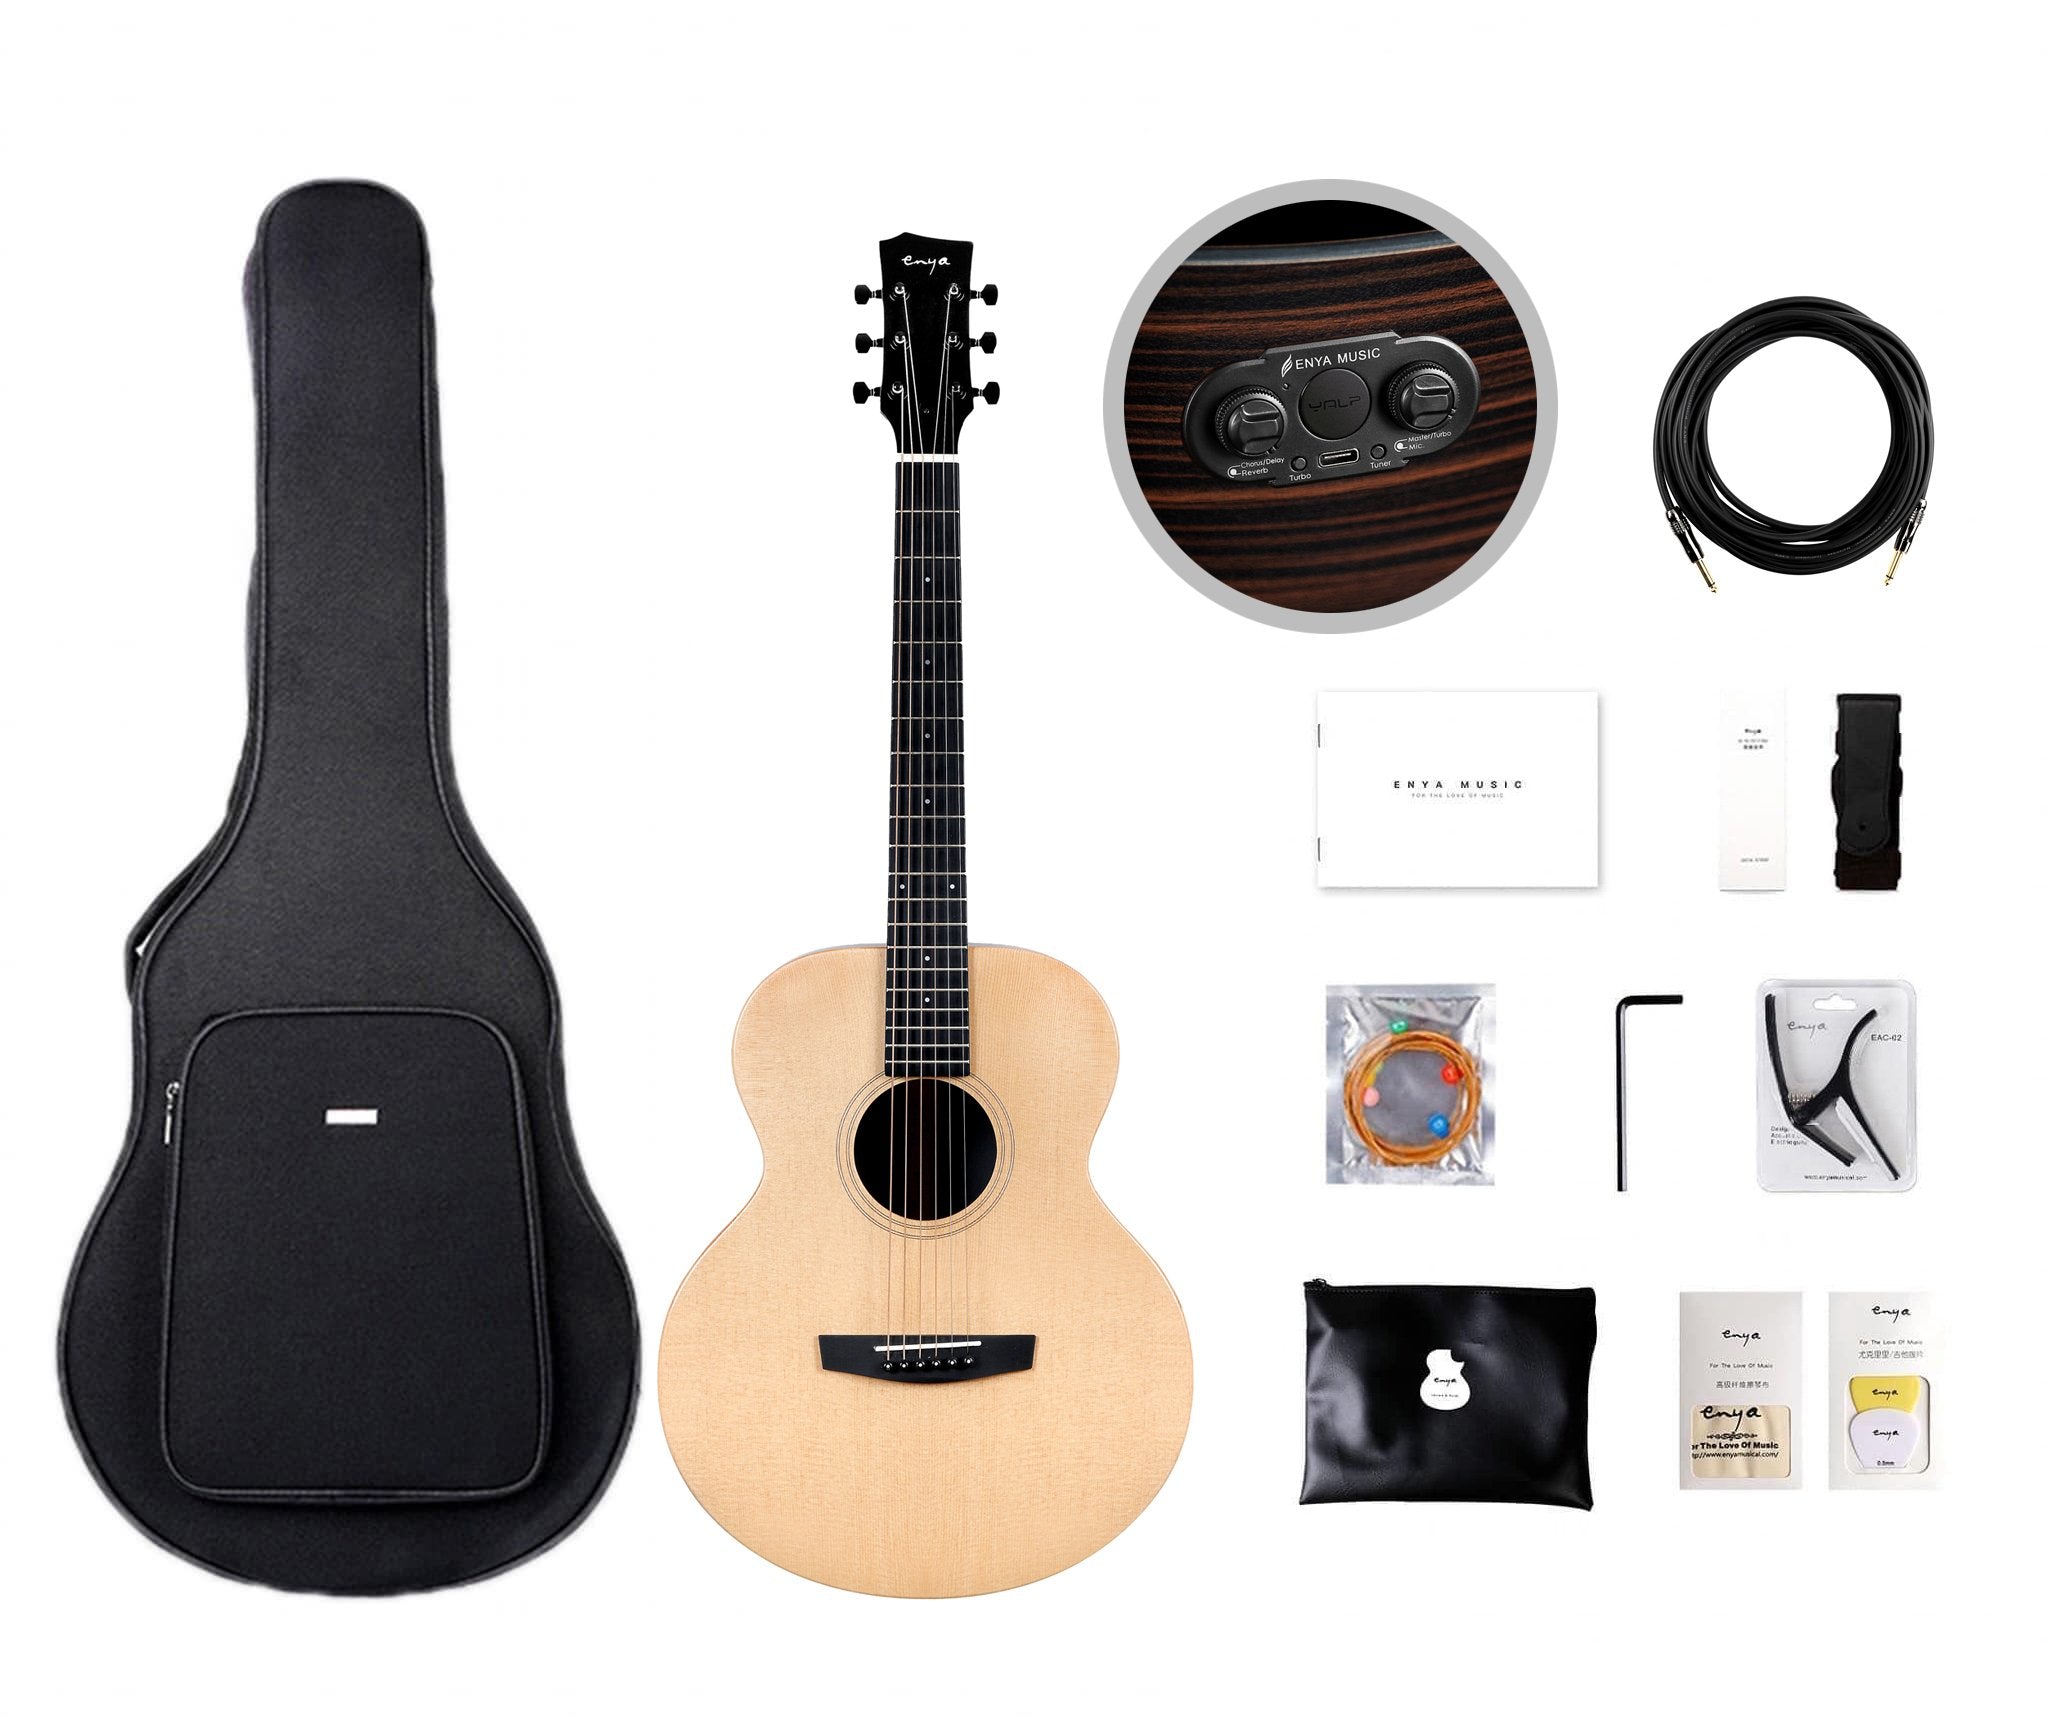 Enya EM-X1 PROe 36" Acoustic Guitar With Bag And Accessories | ENYA , Zoso Music